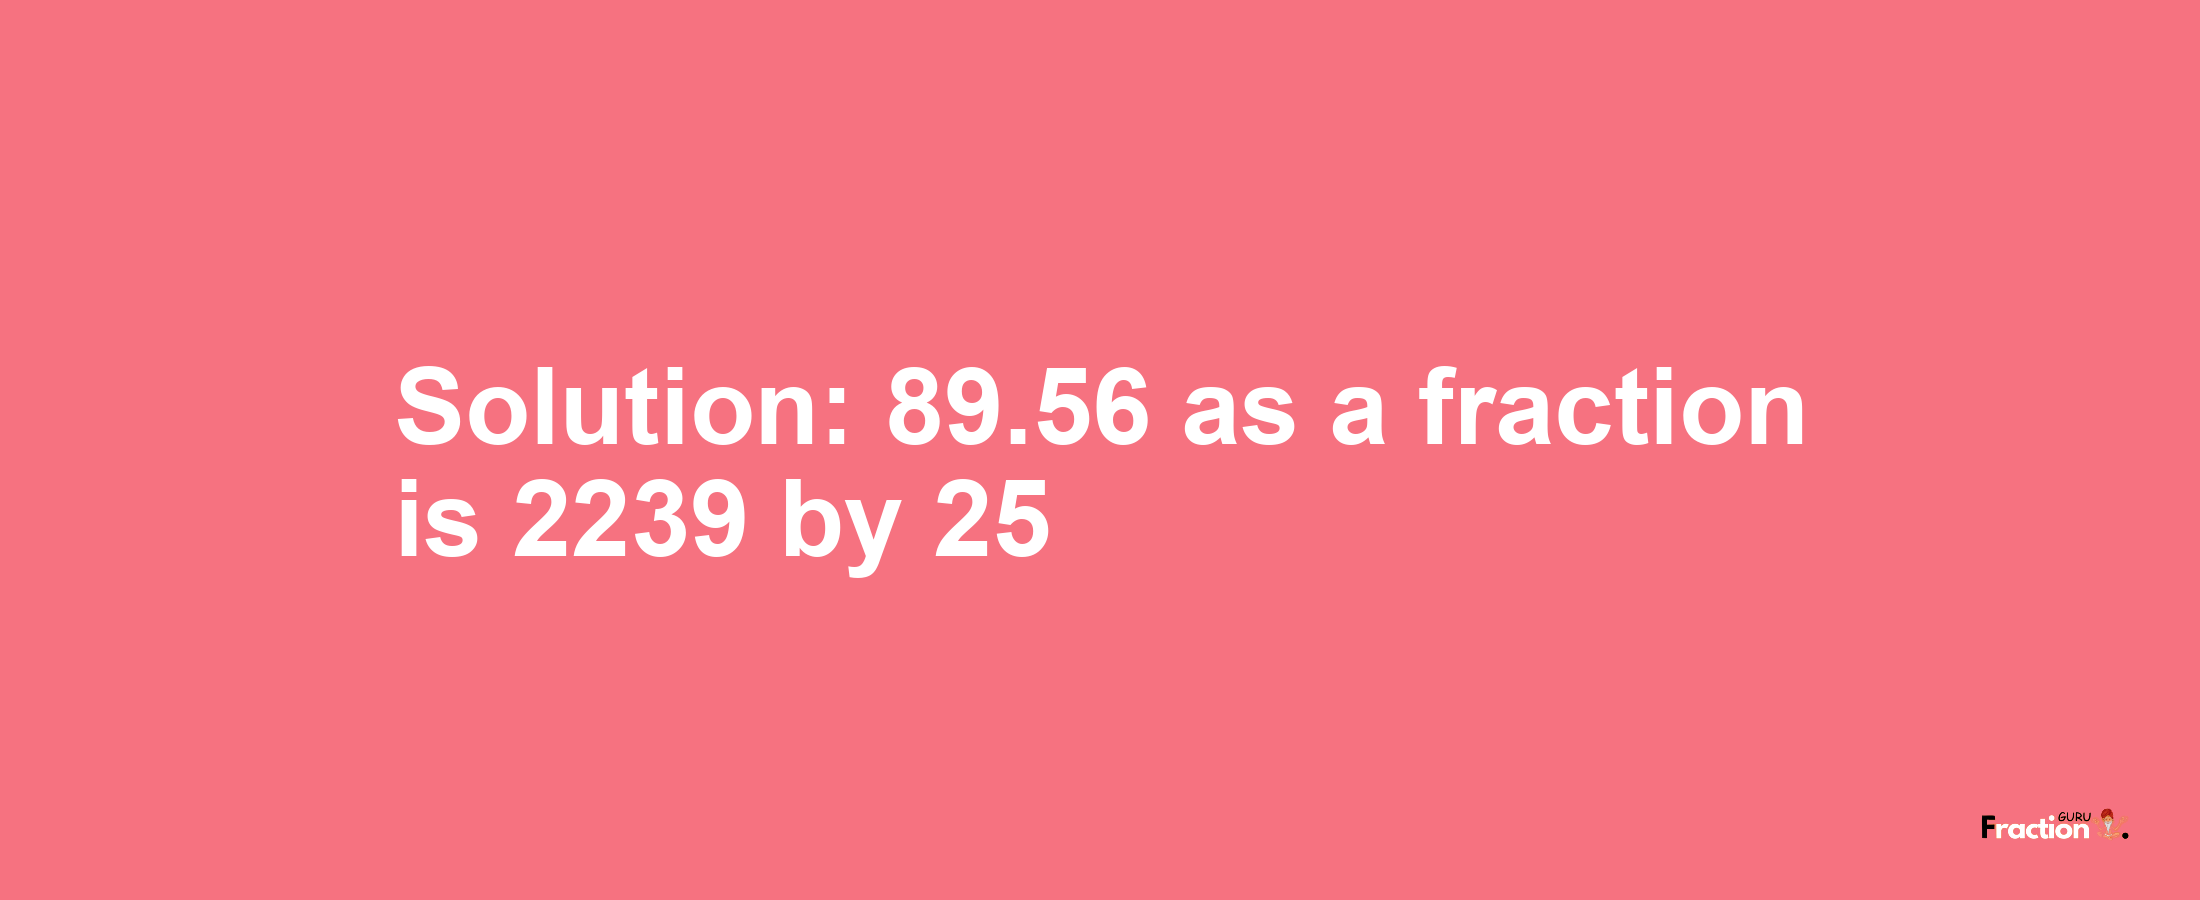 Solution:89.56 as a fraction is 2239/25